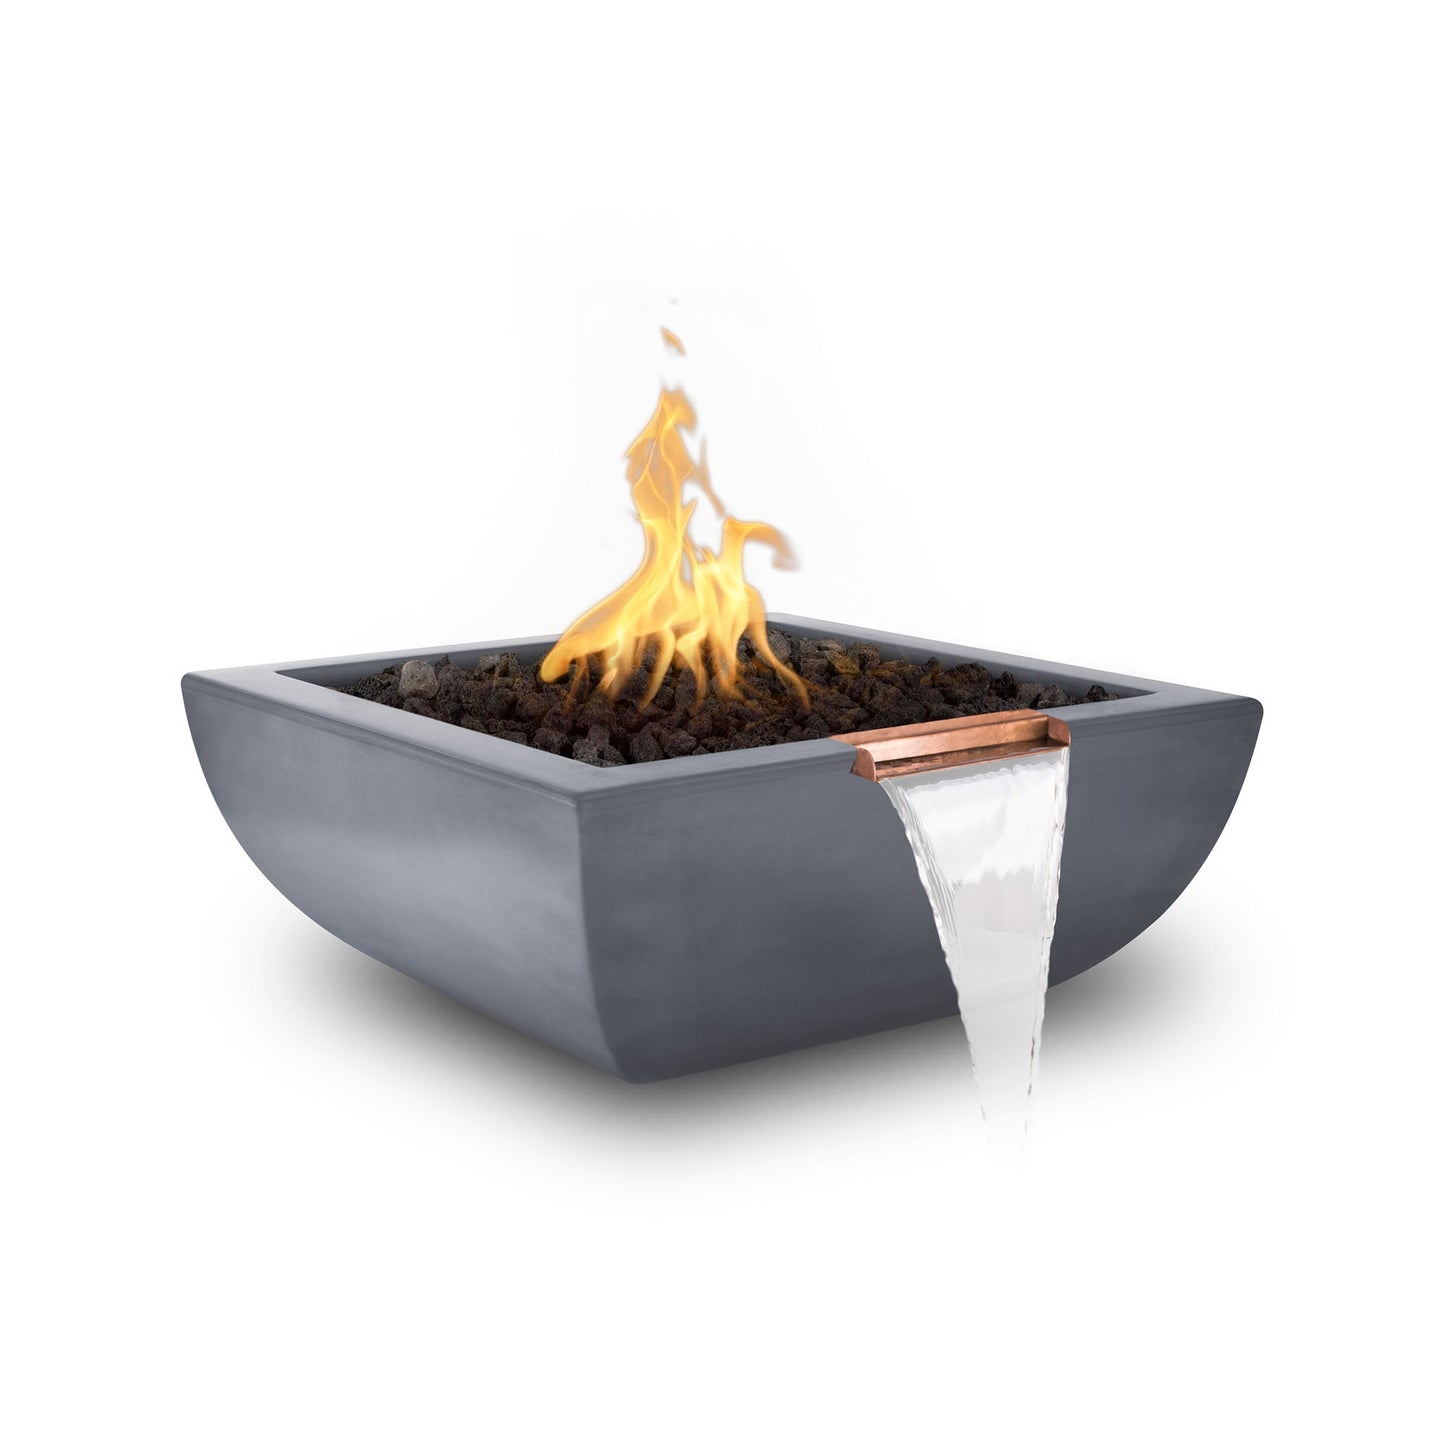 The Outdoor Plus Square Avalon 24" Rustic Gray GFRC Concrete Natural Gas Fire & Water Bowl with Match Lit with Flame Sense Ignition